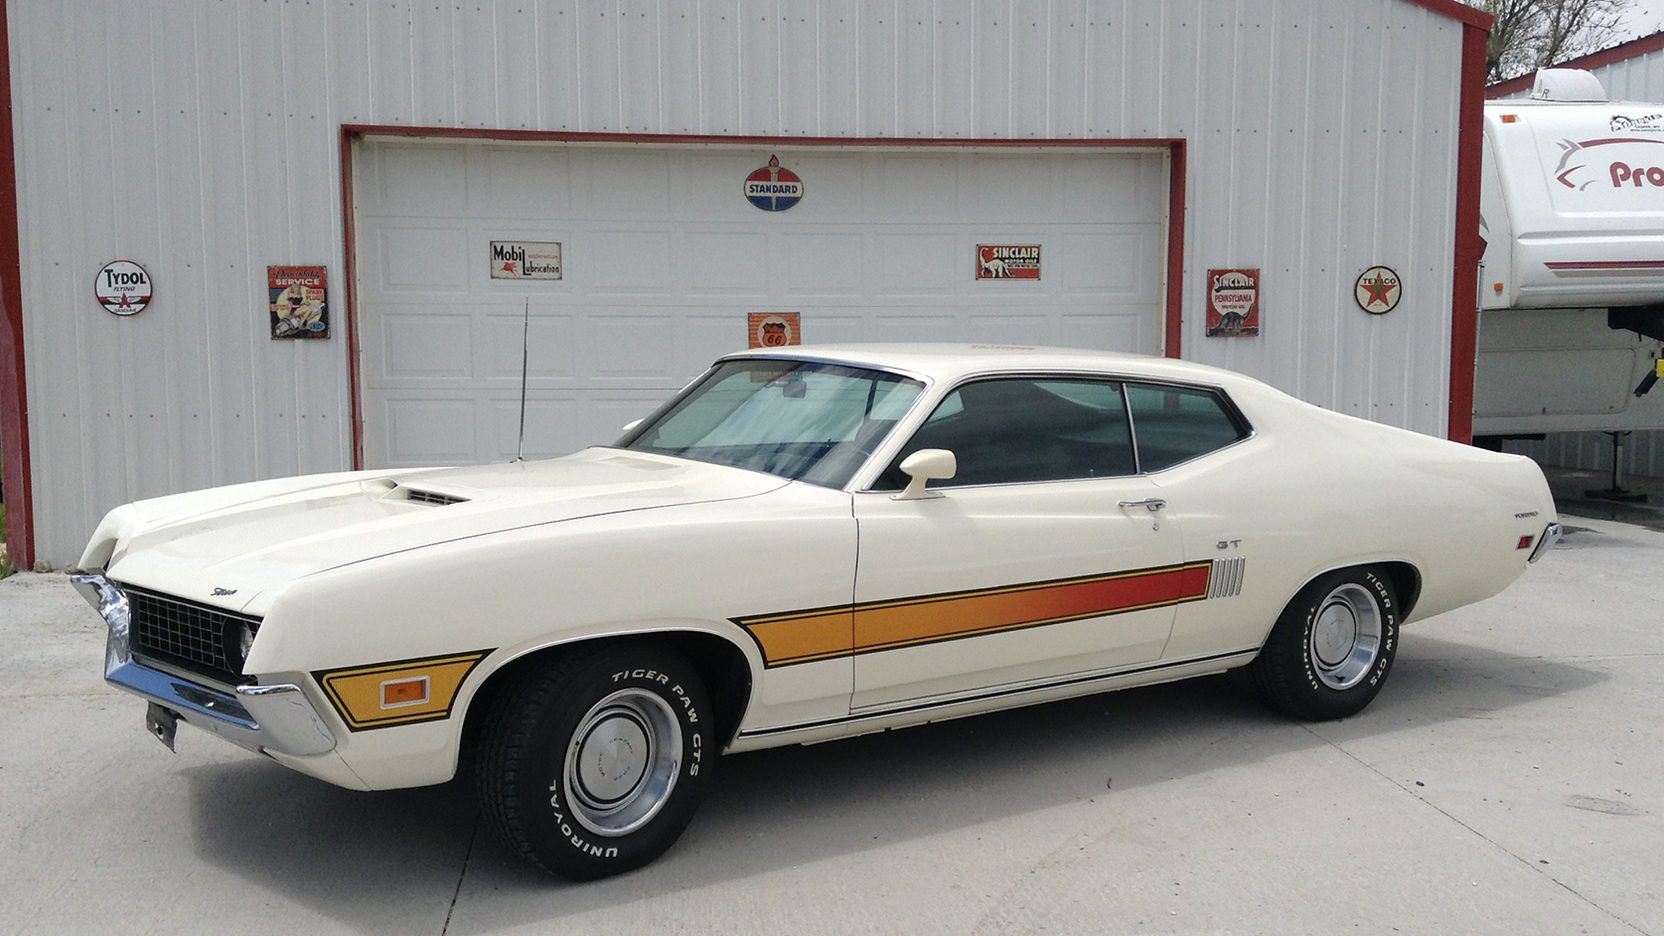 1970 Ford Torino GT 351, white, decal